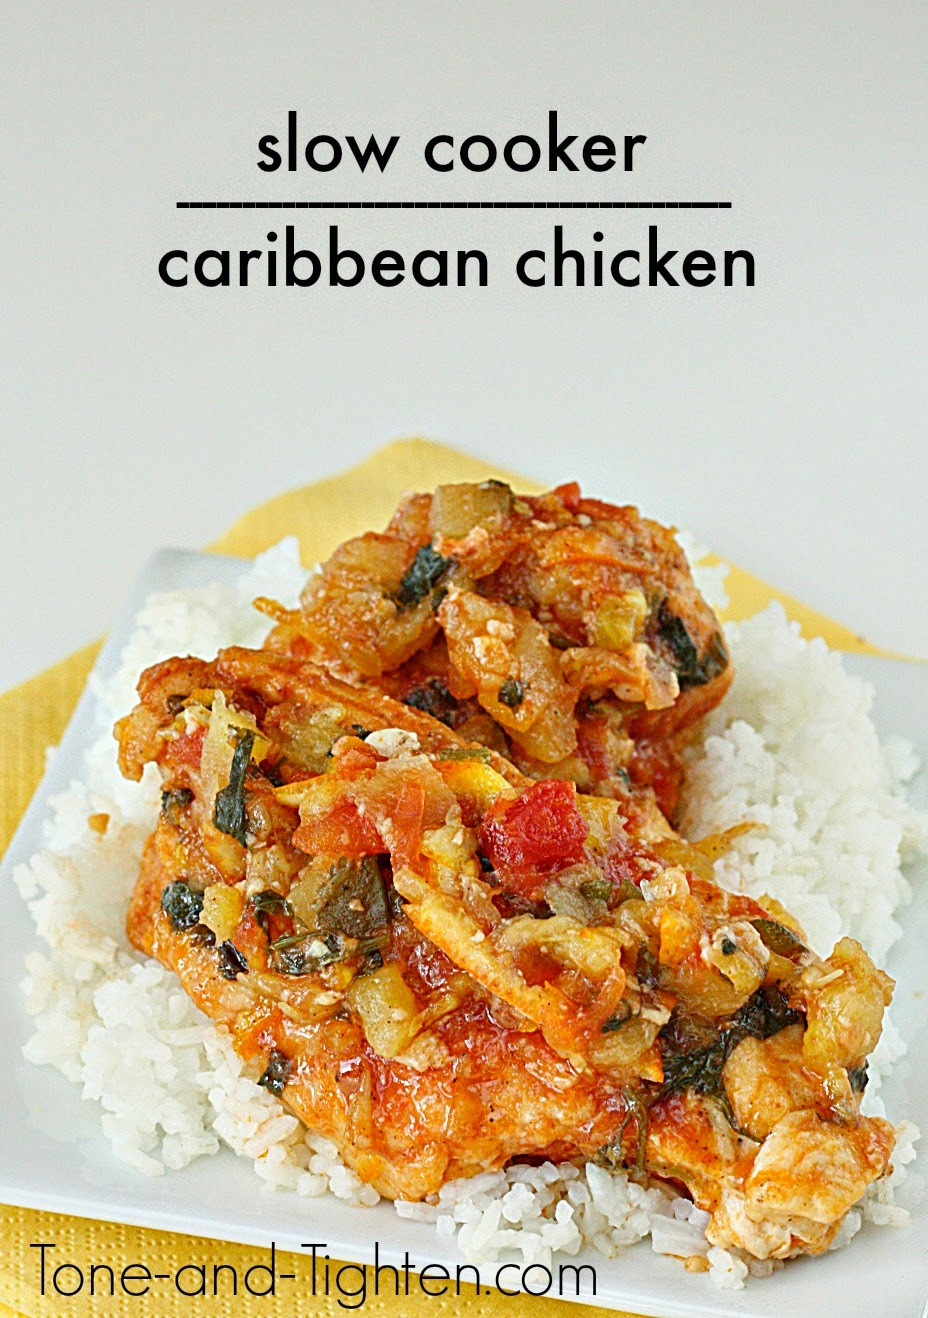 Slow Cooker Healthy Chicken Recipes
 Slow Cooker Healthy Caribbean Chicken Recipe